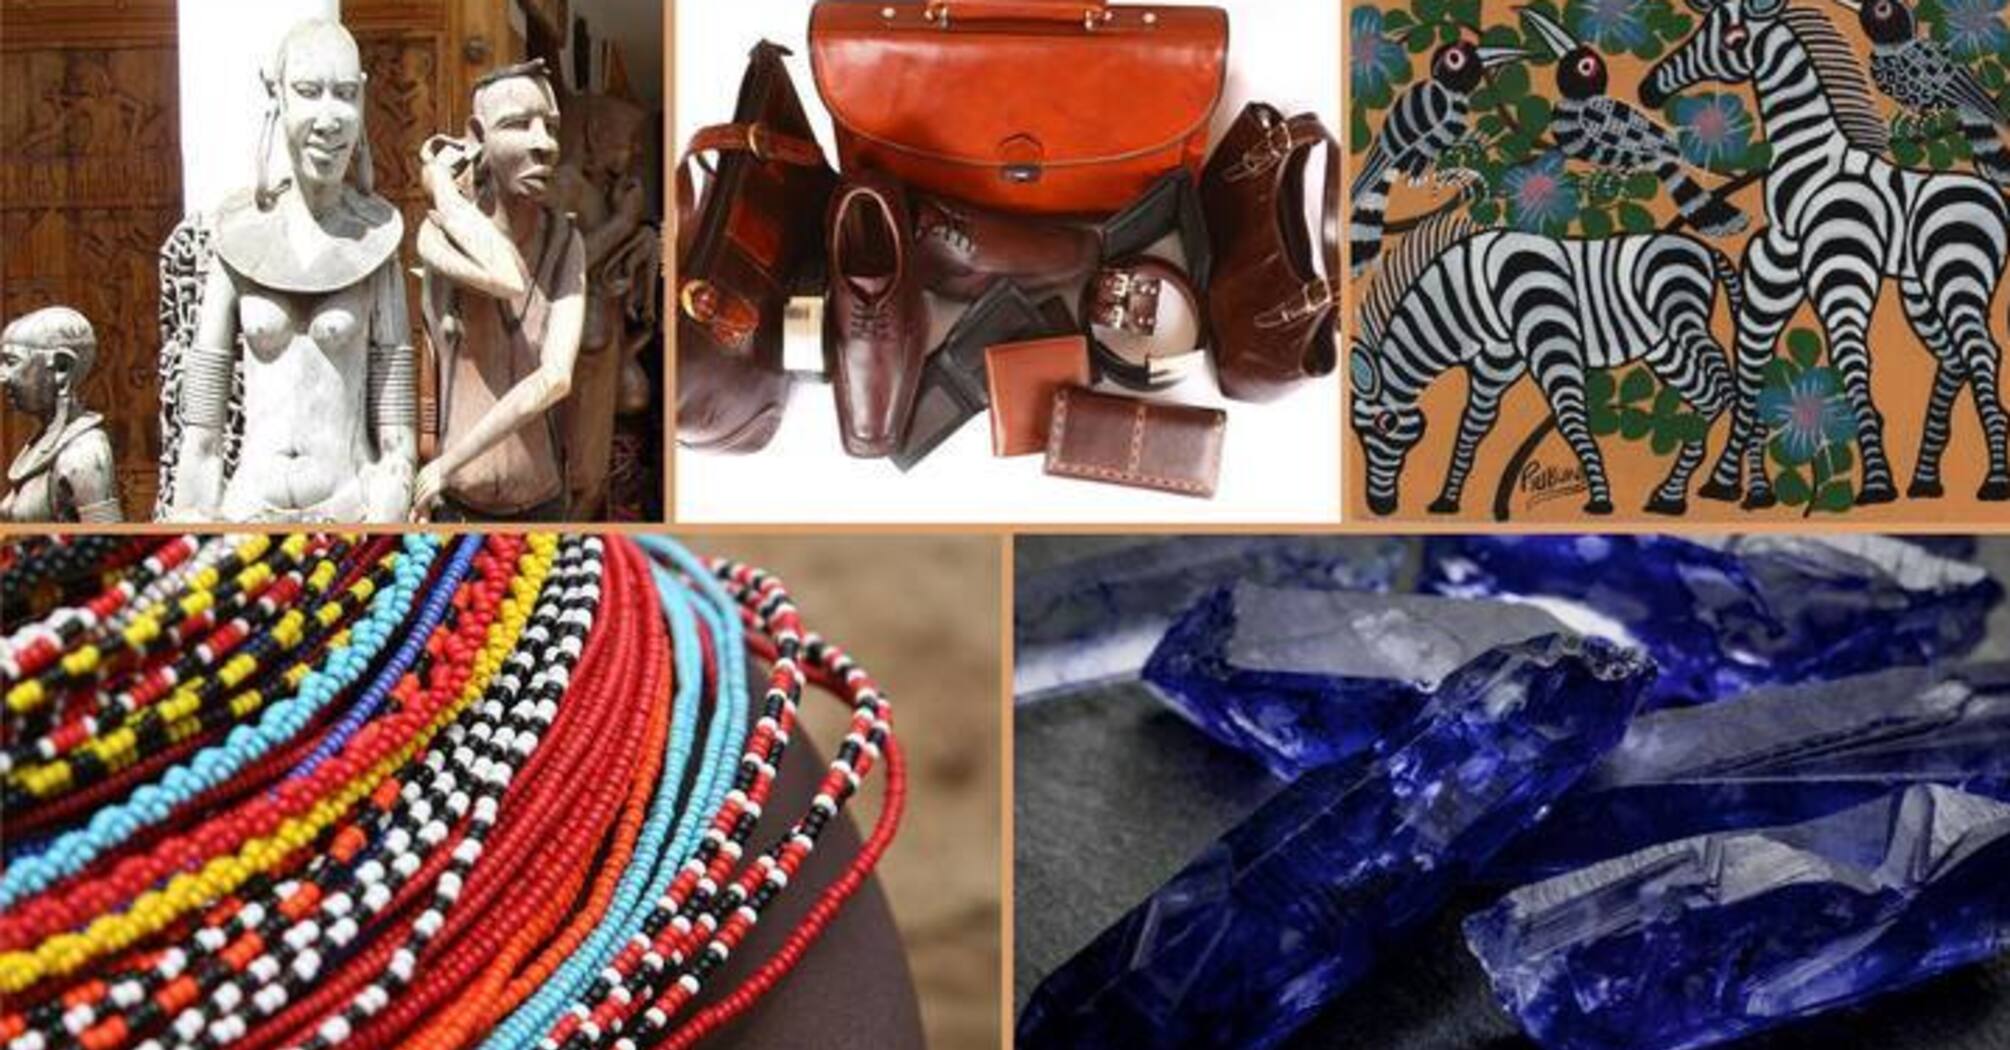 Precious tanzanite and leather goods from local artisans: purchase these souvenirs if you are traveling to Tanzania